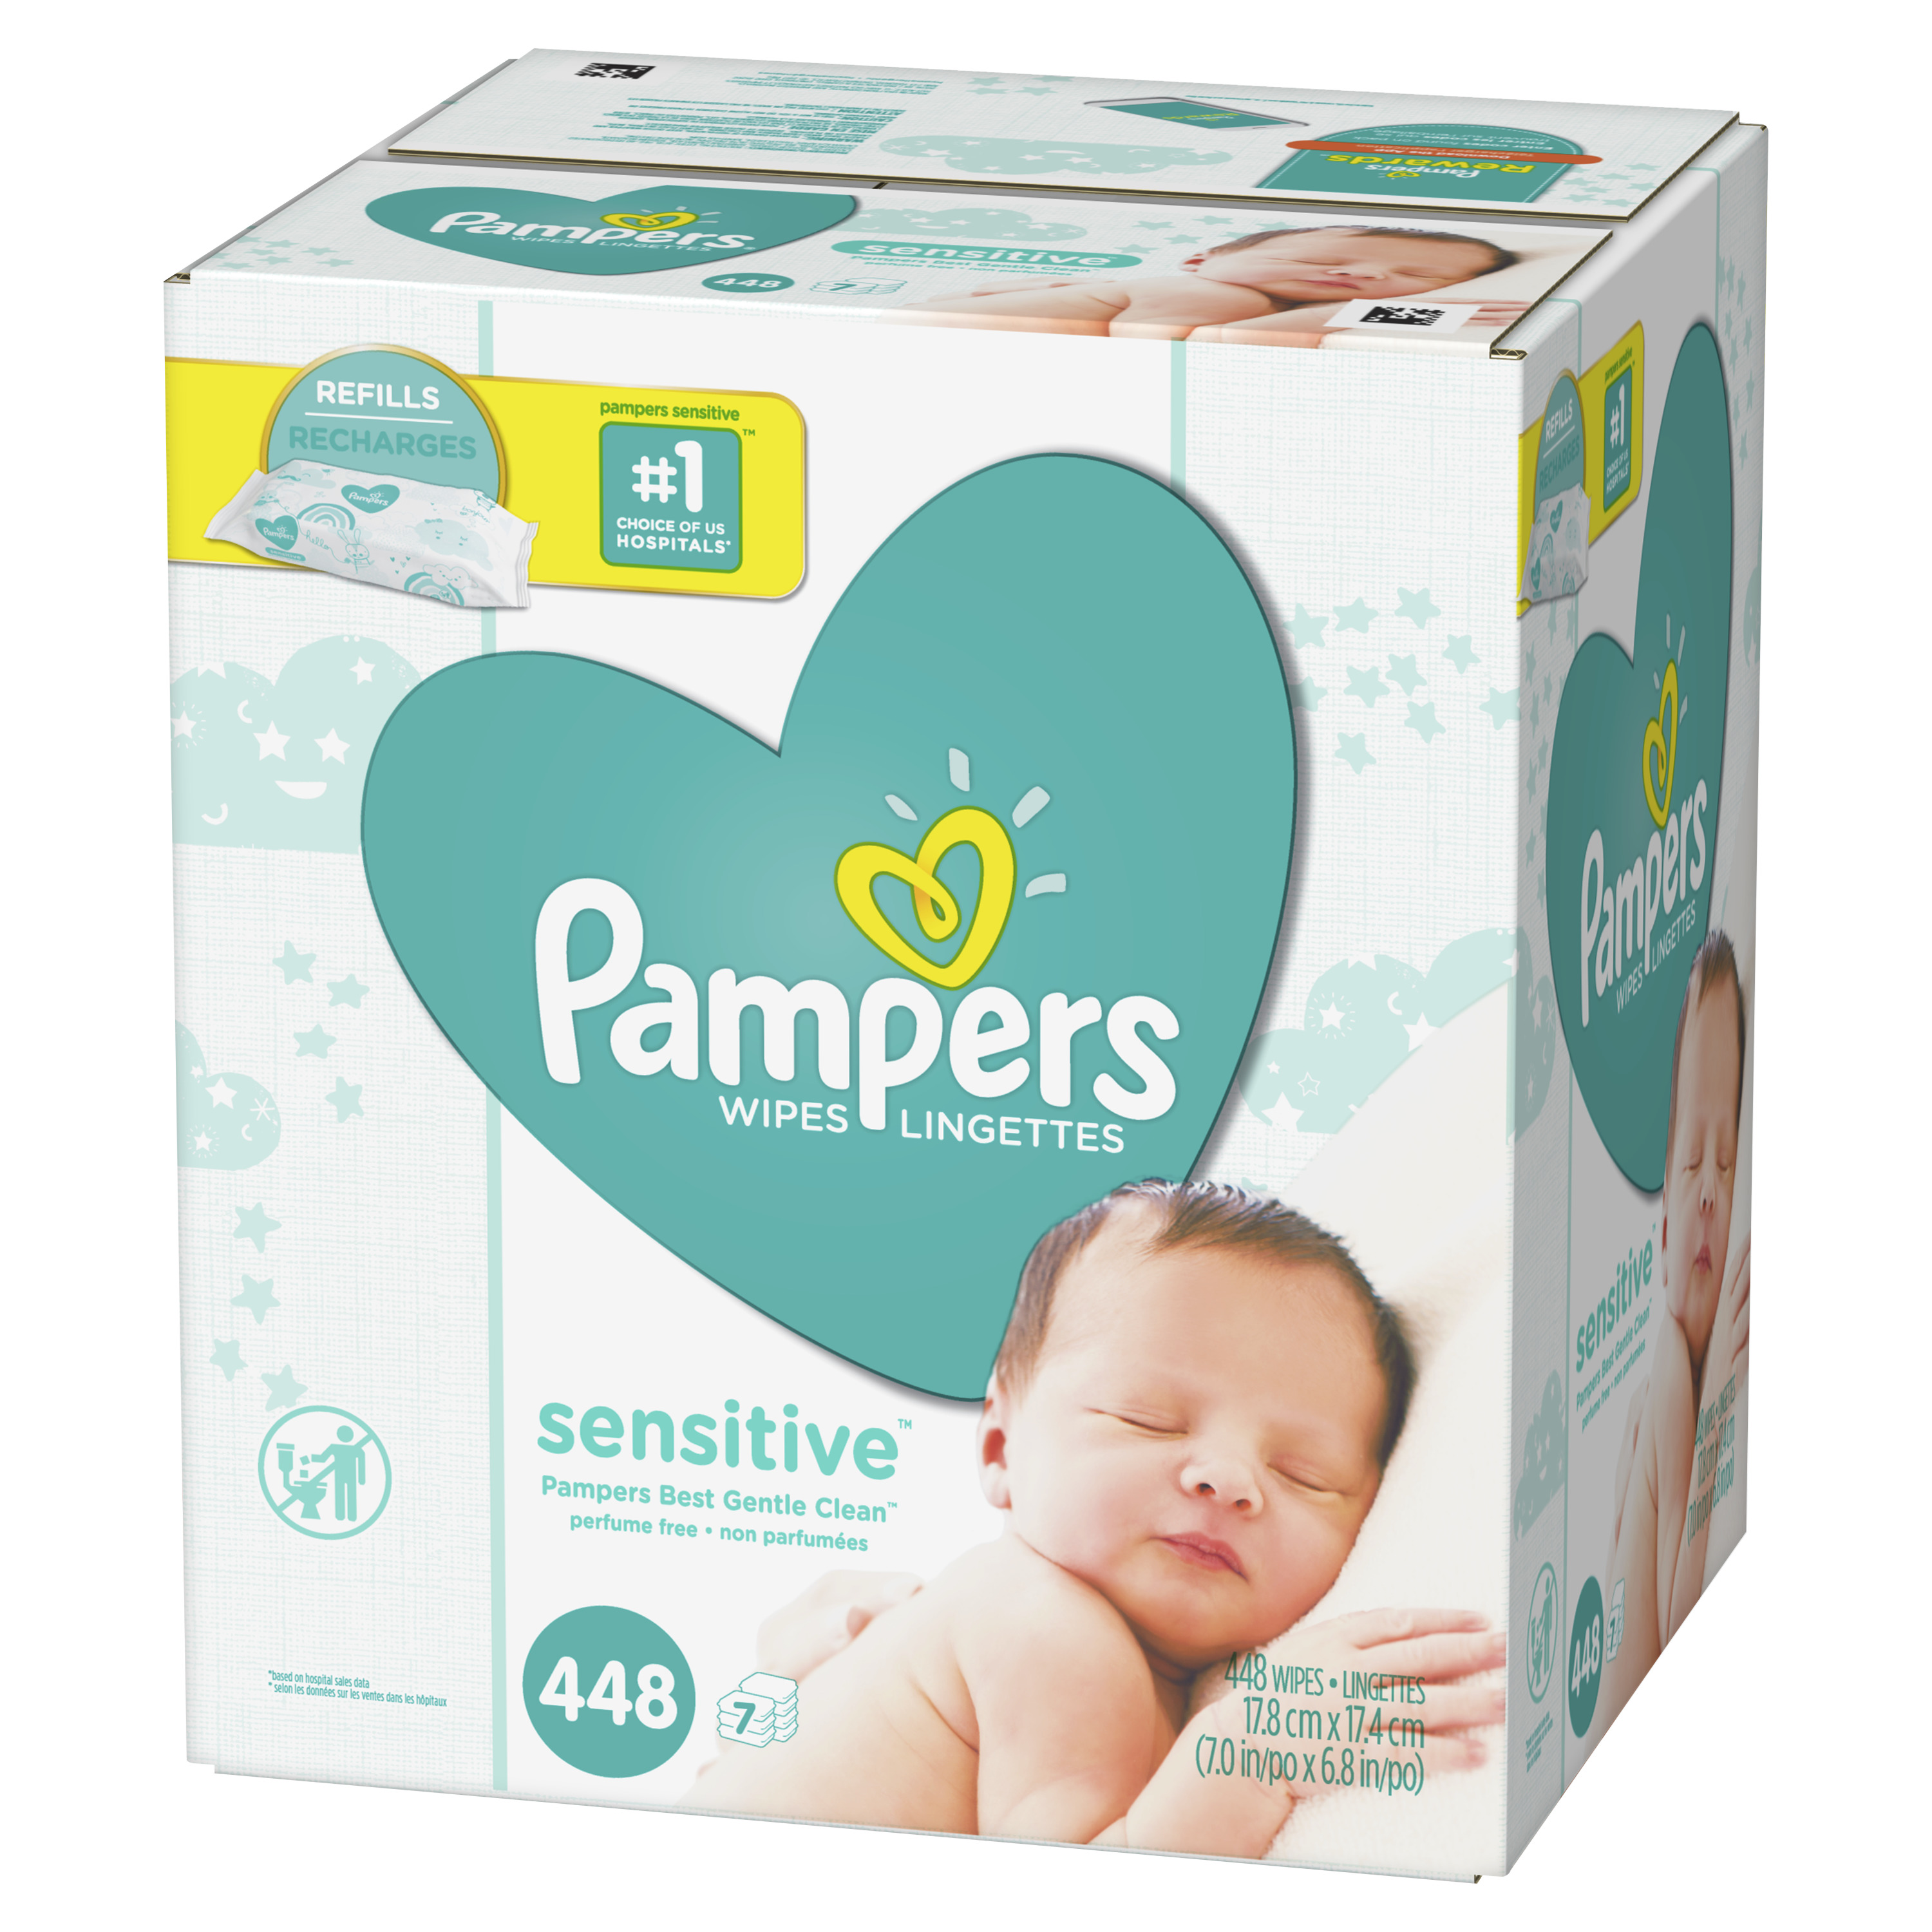 Pampers Sensitive Baby Wipes, 448 Count - image 5 of 11